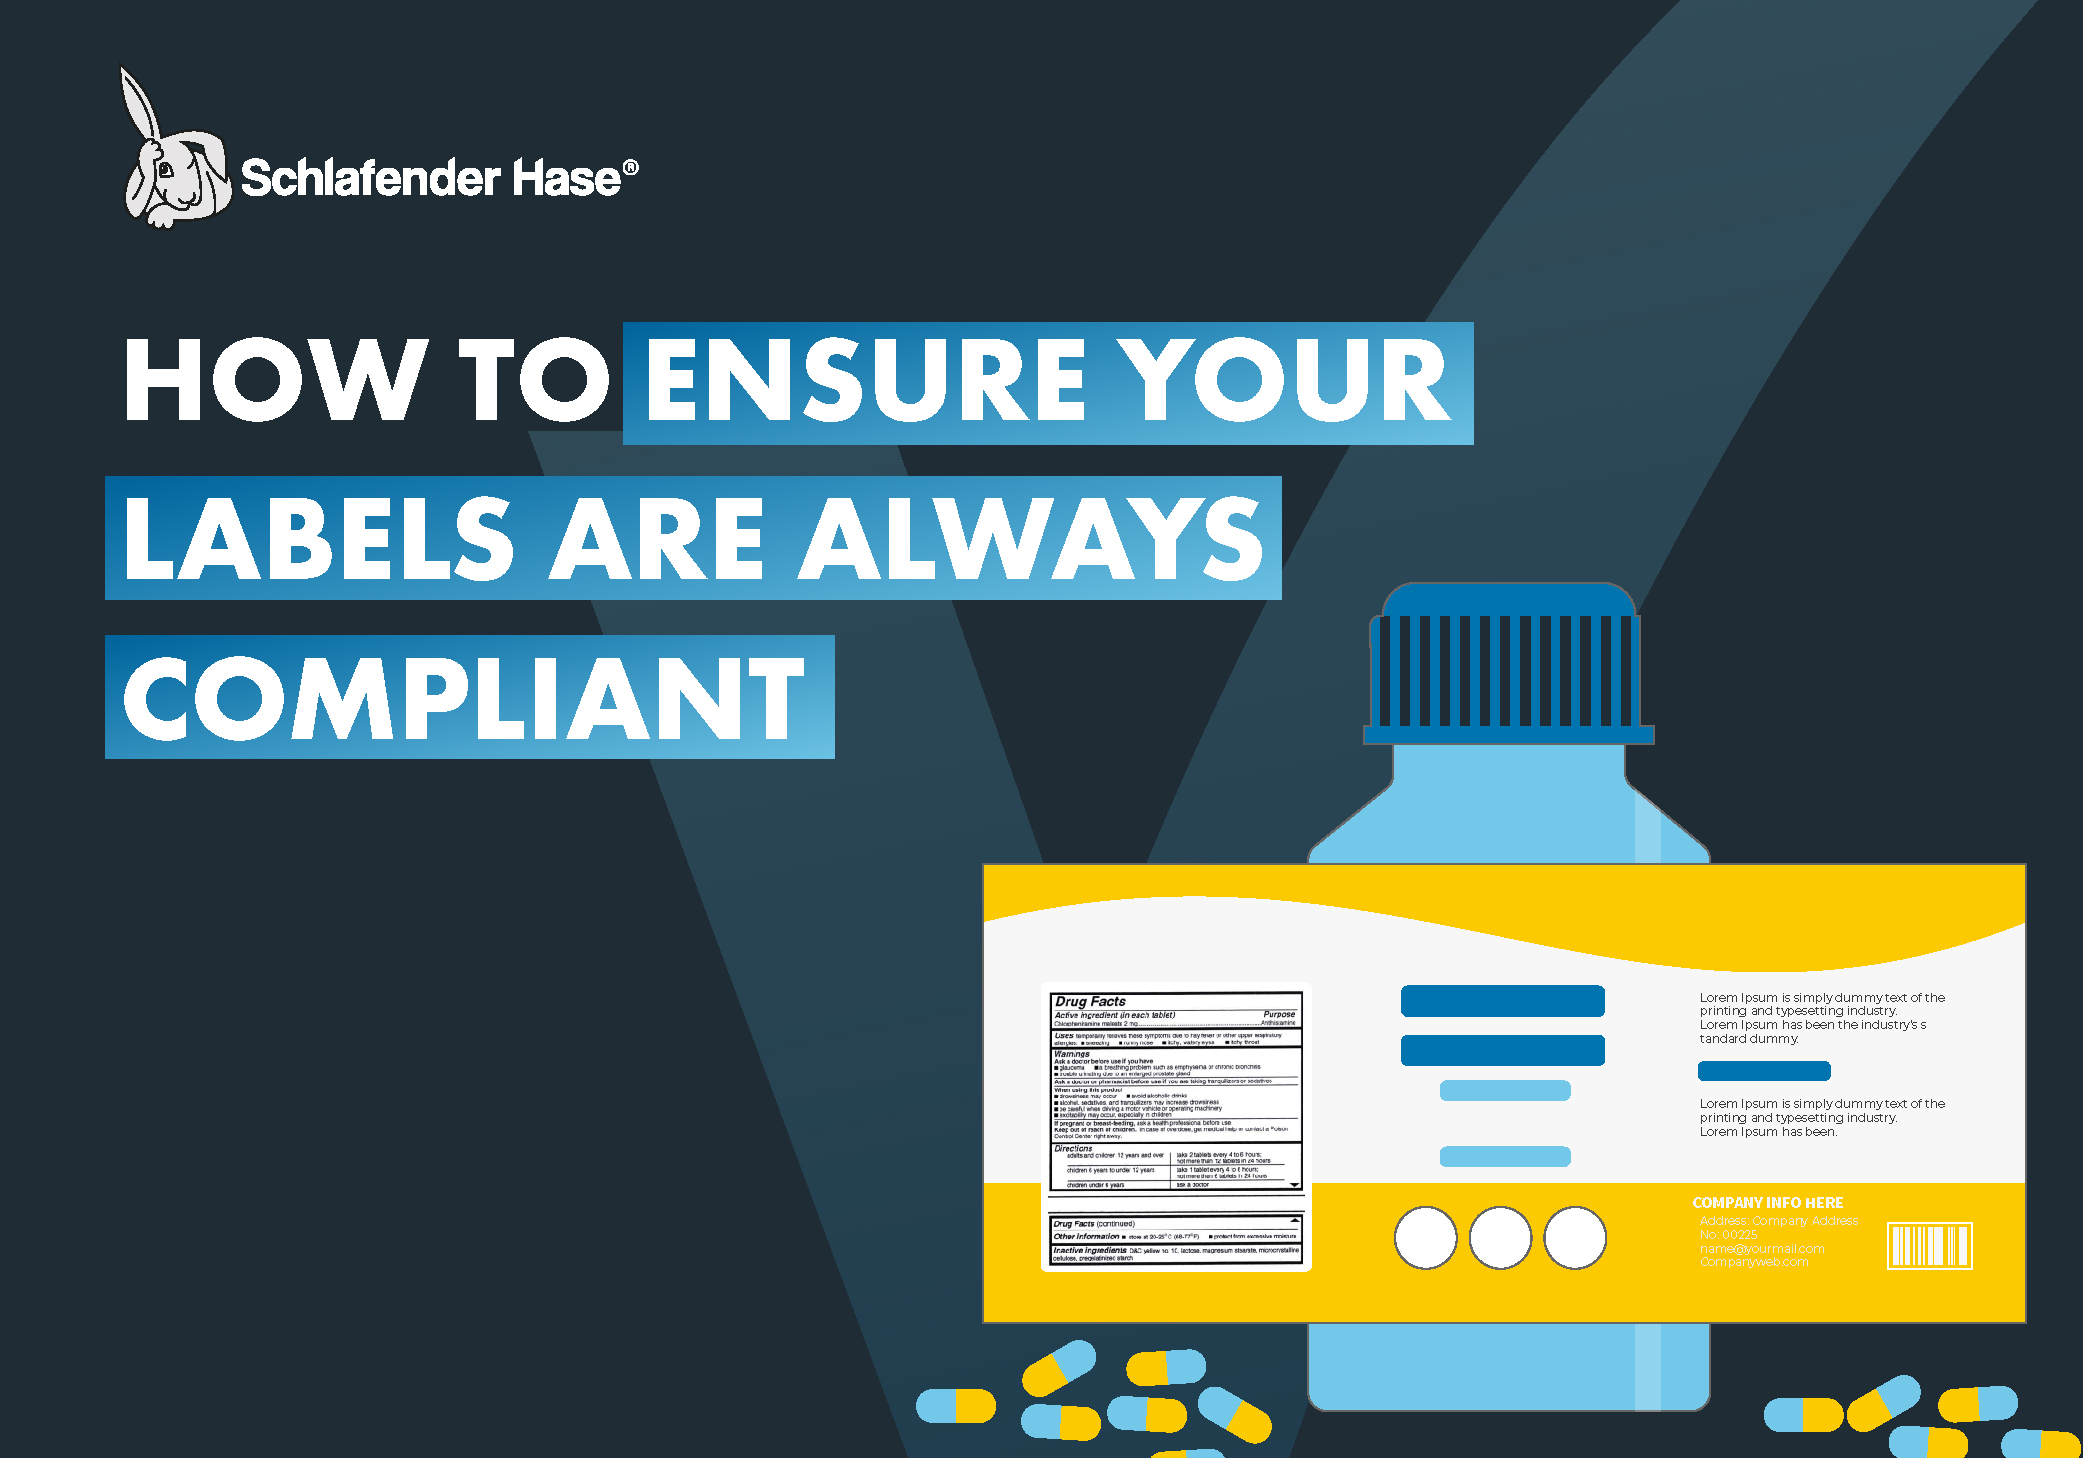 How To Ensure Your Labels Are Always Compliant